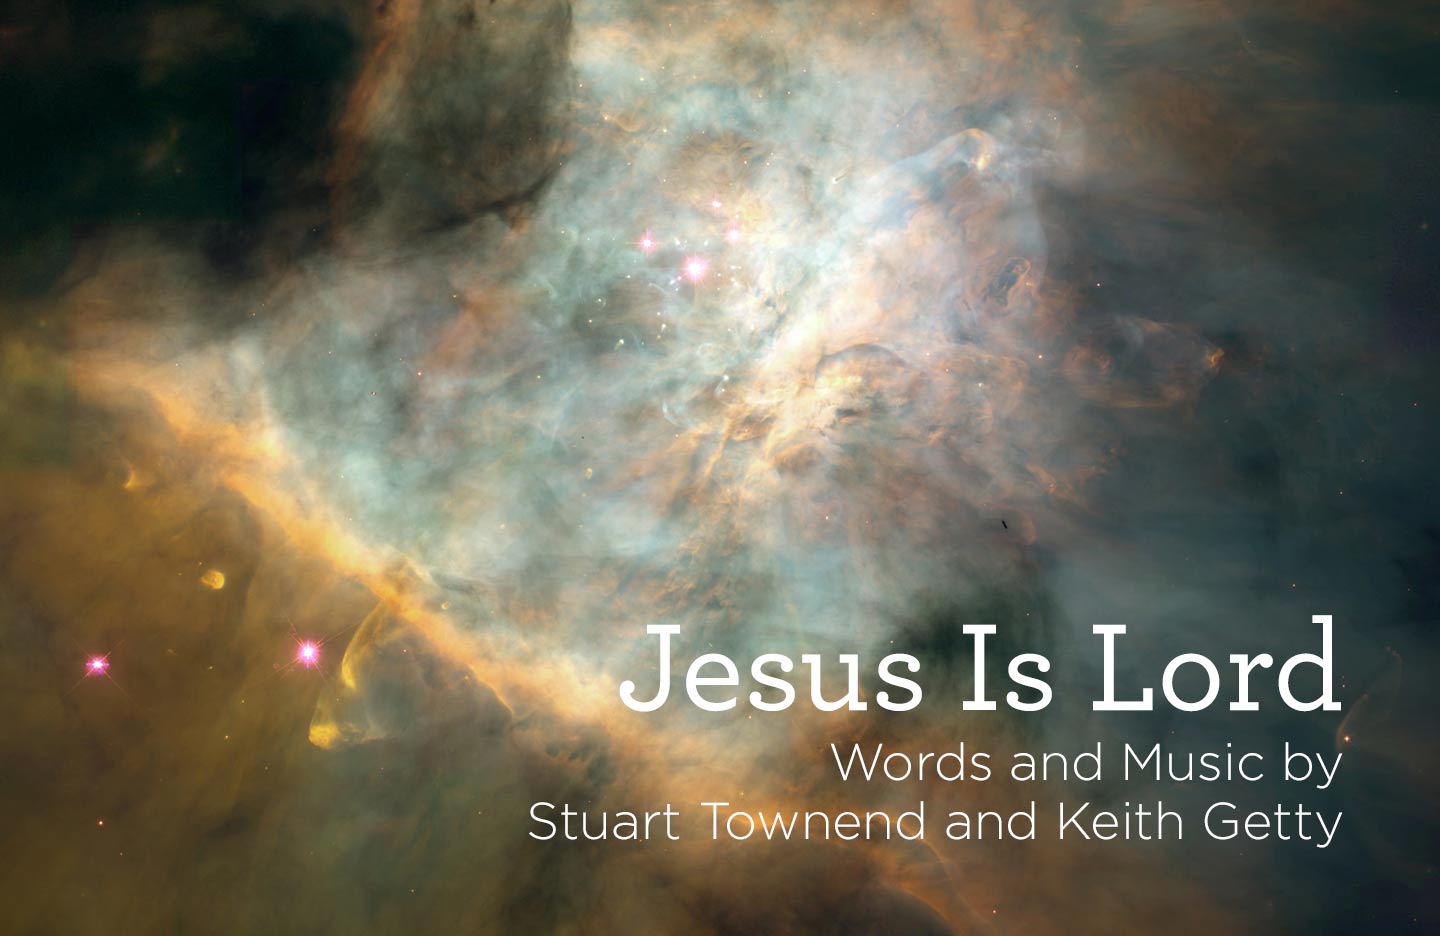 hymn: "jesus is lord" by stuart townend and keith getty